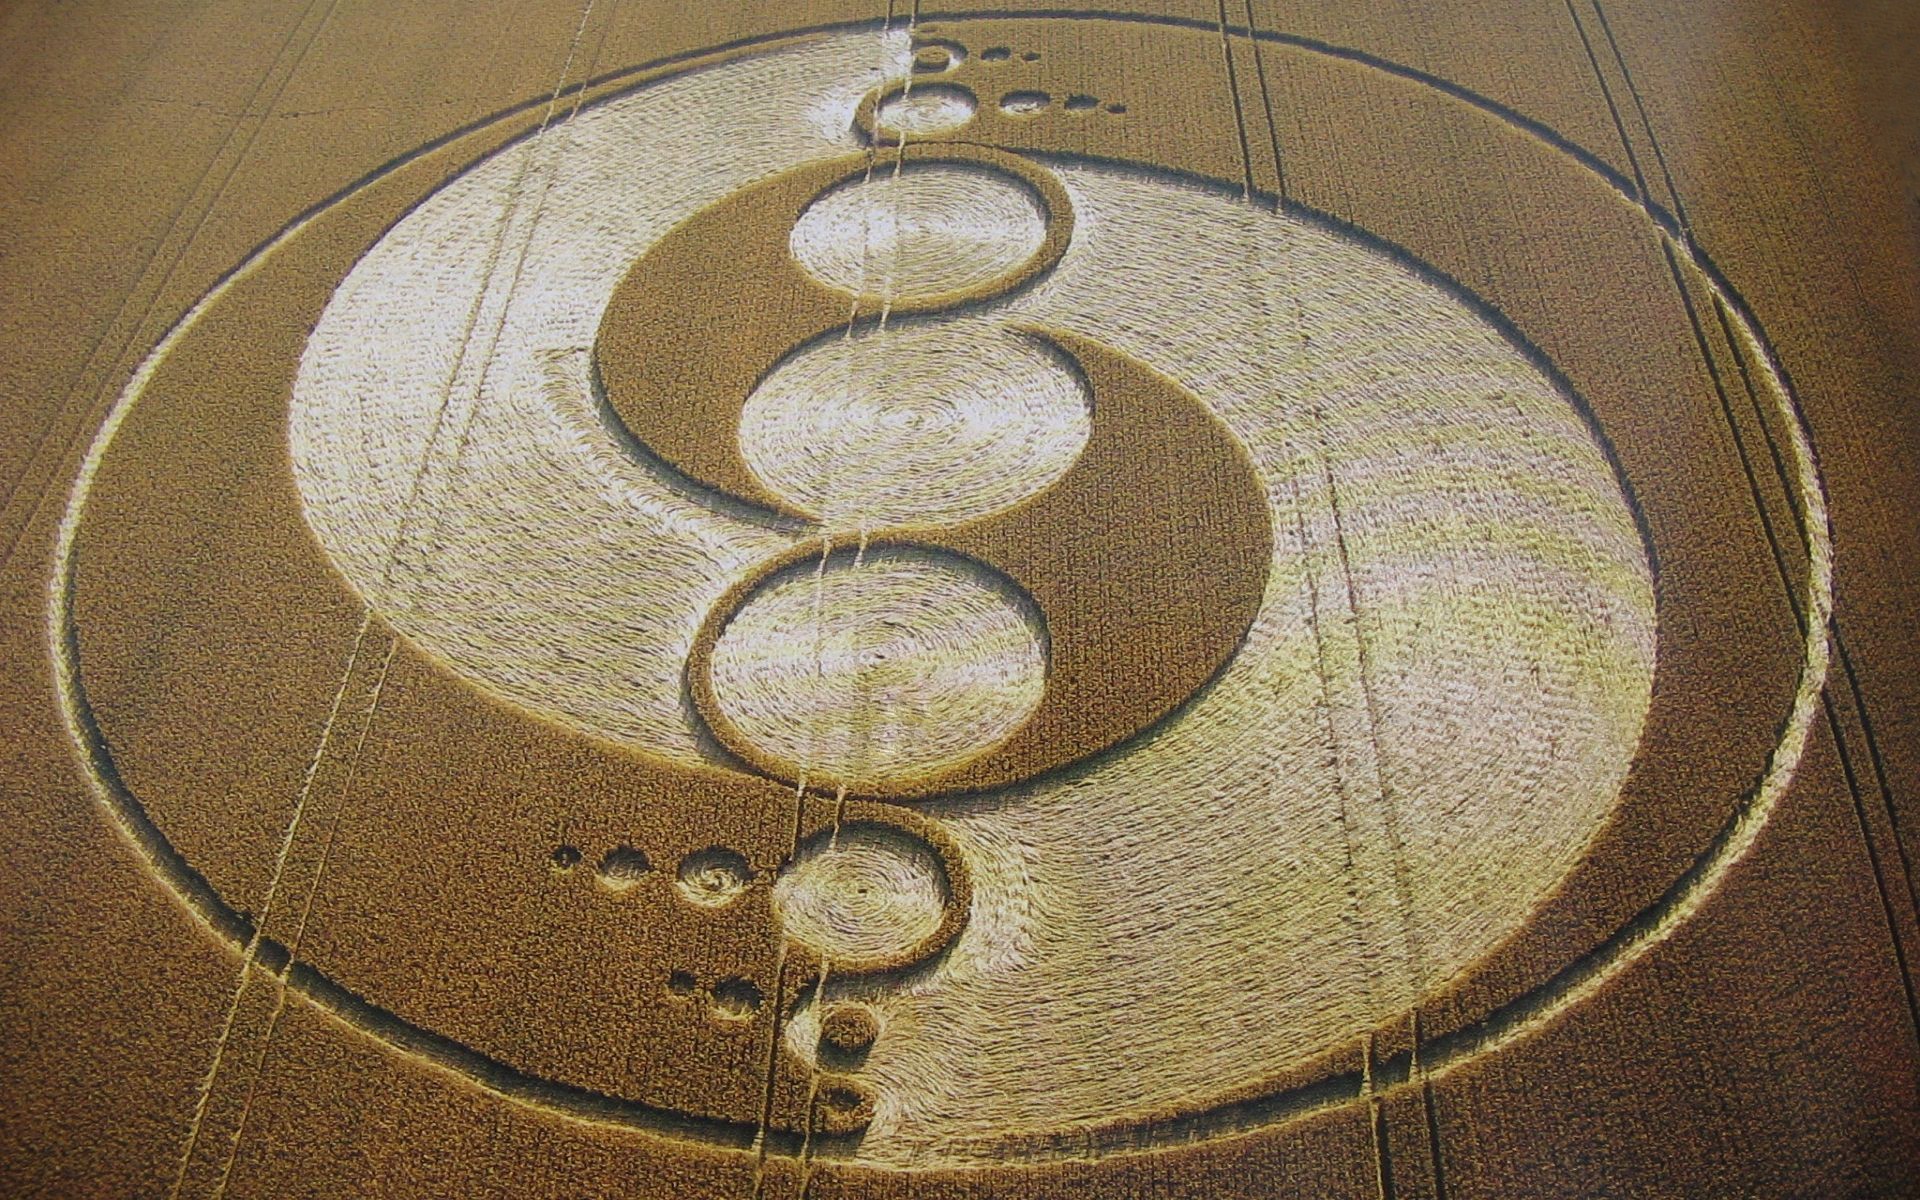 Crop circles ufos the field want to believe crop circles wallpaper